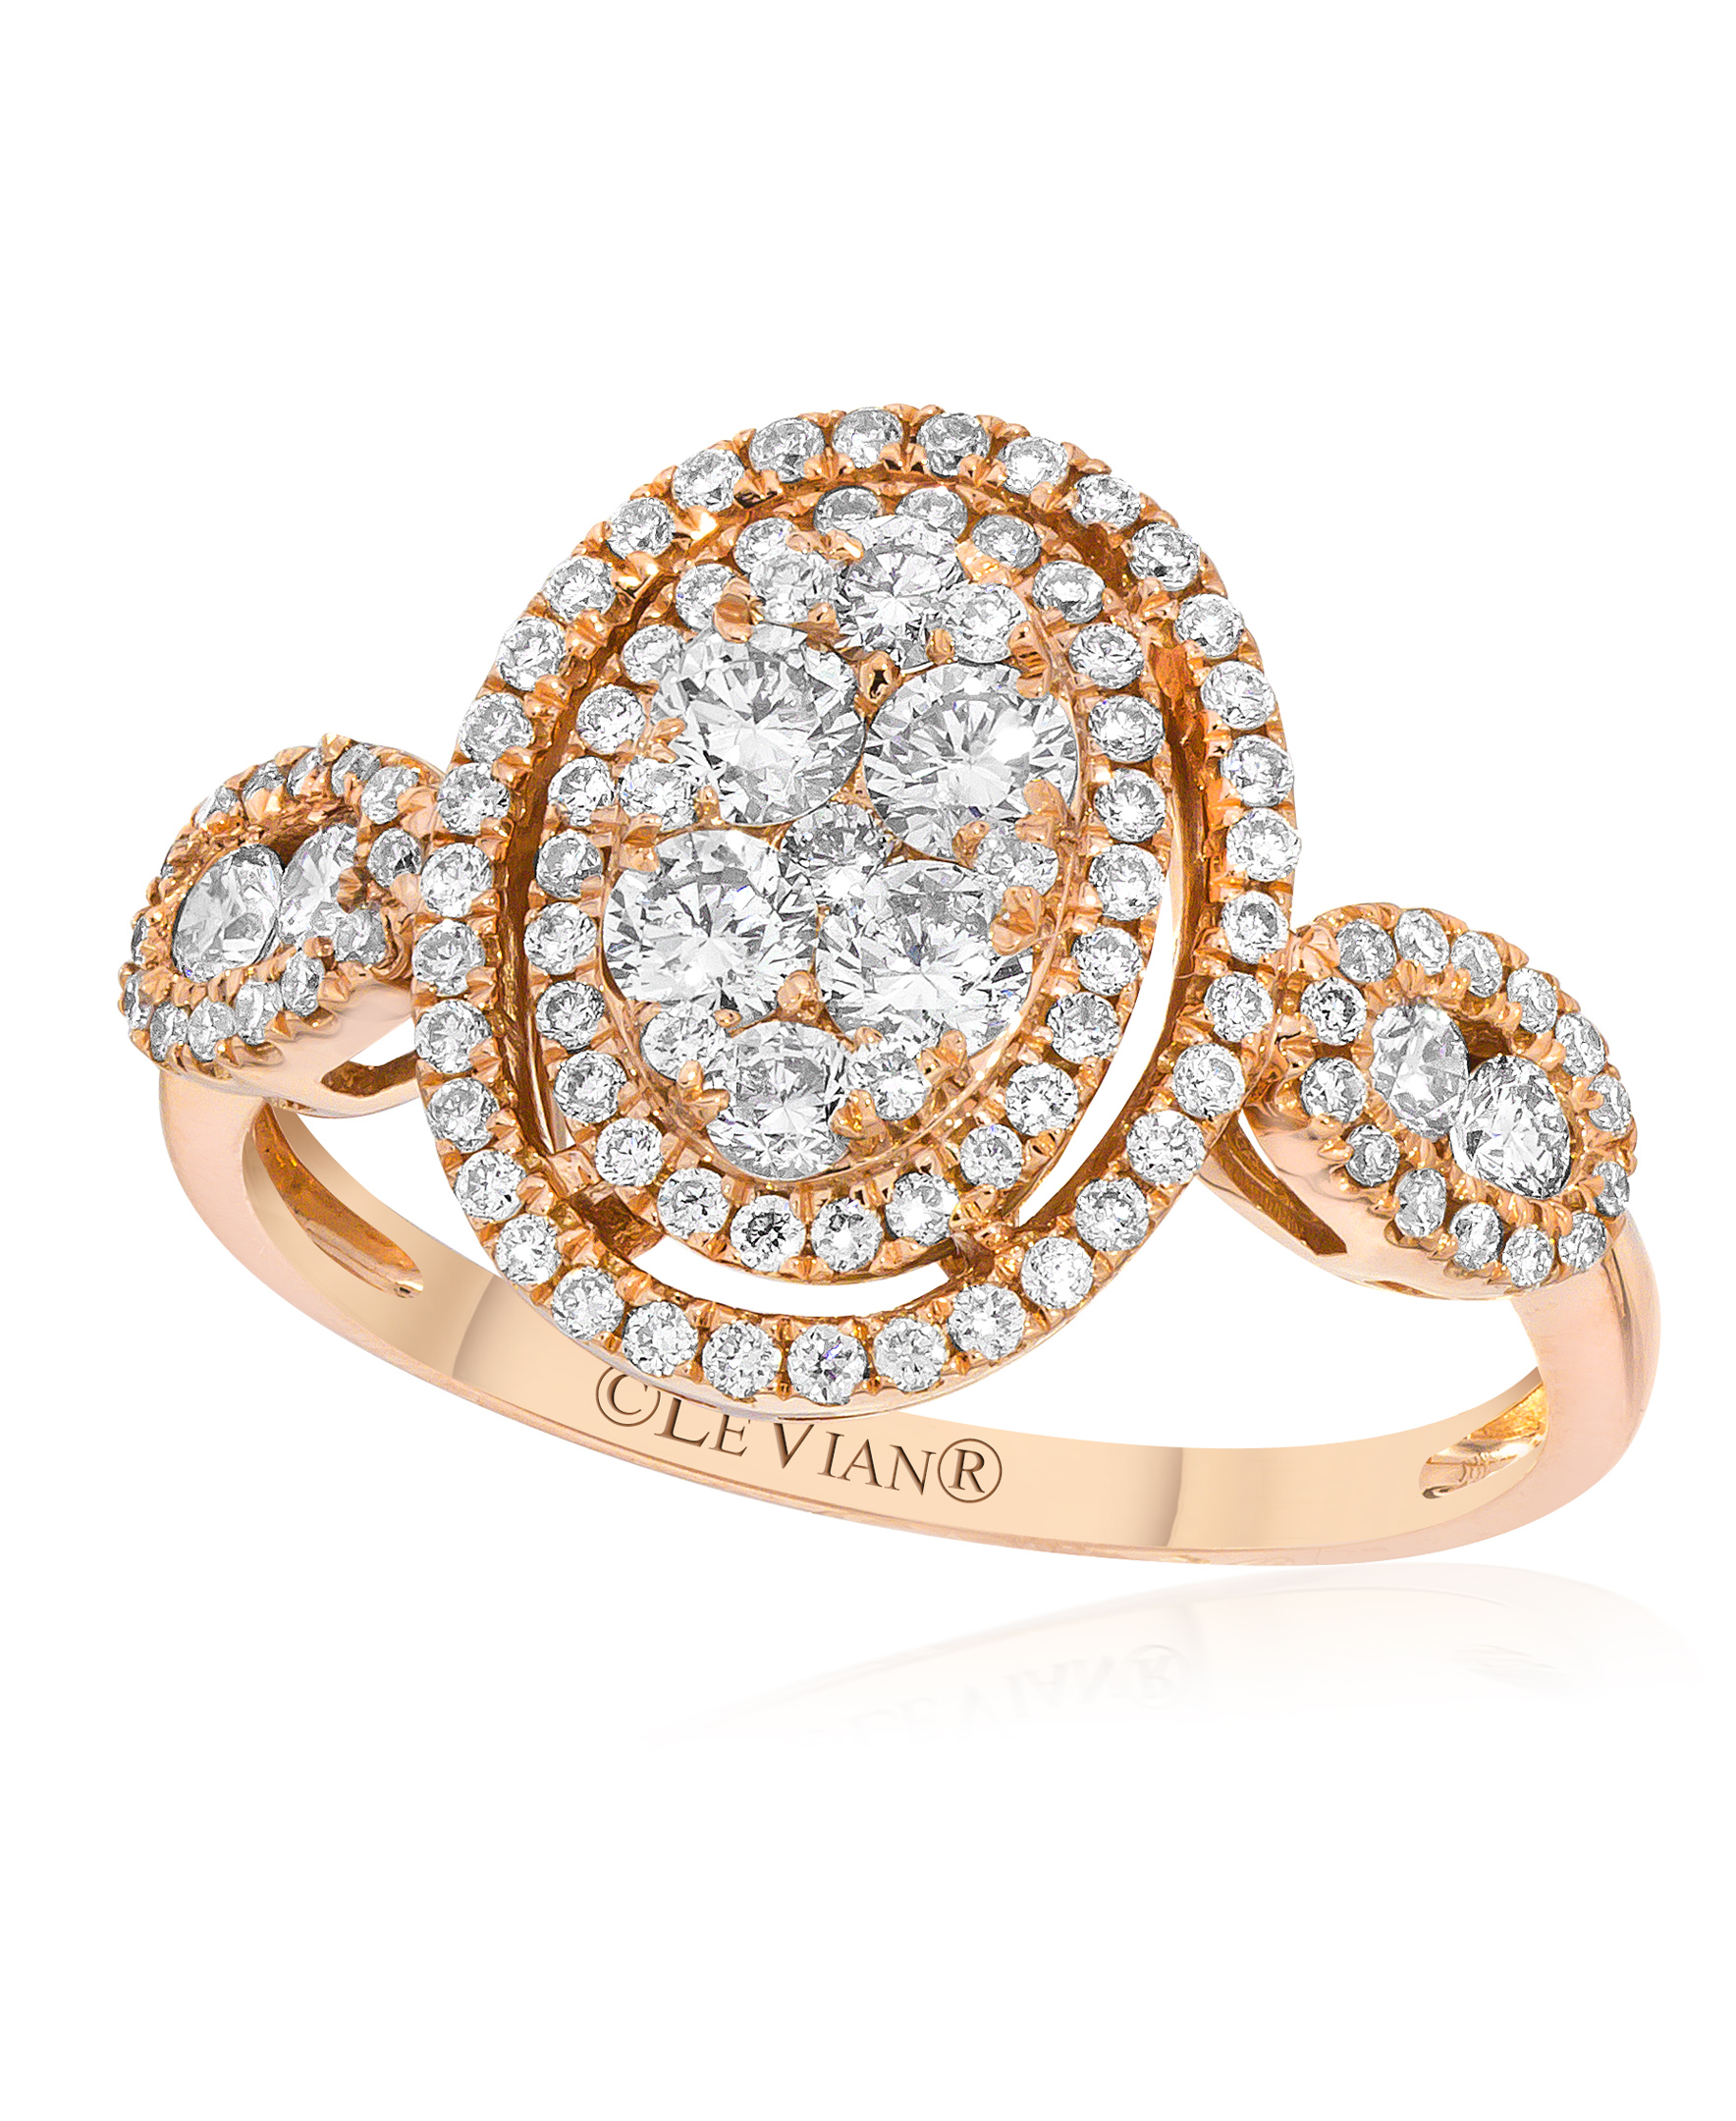 Le Vian Ring Vanilla Diamonds Set In 14k Strawberry Gold Ring Size 7 Zuef 3 In Pink